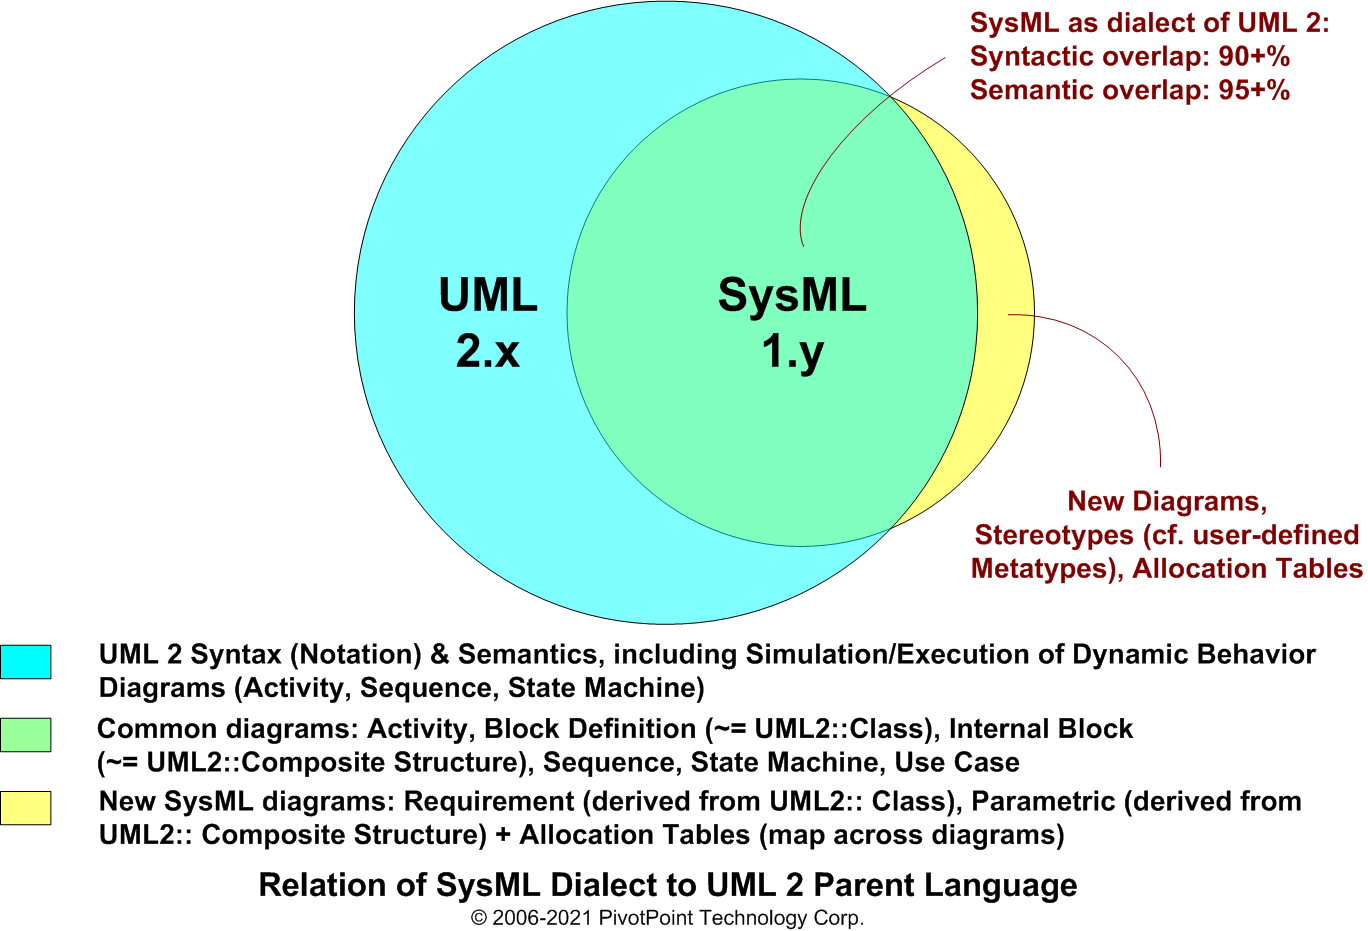 SysML FAQ: What is the relation between SysML and UML?